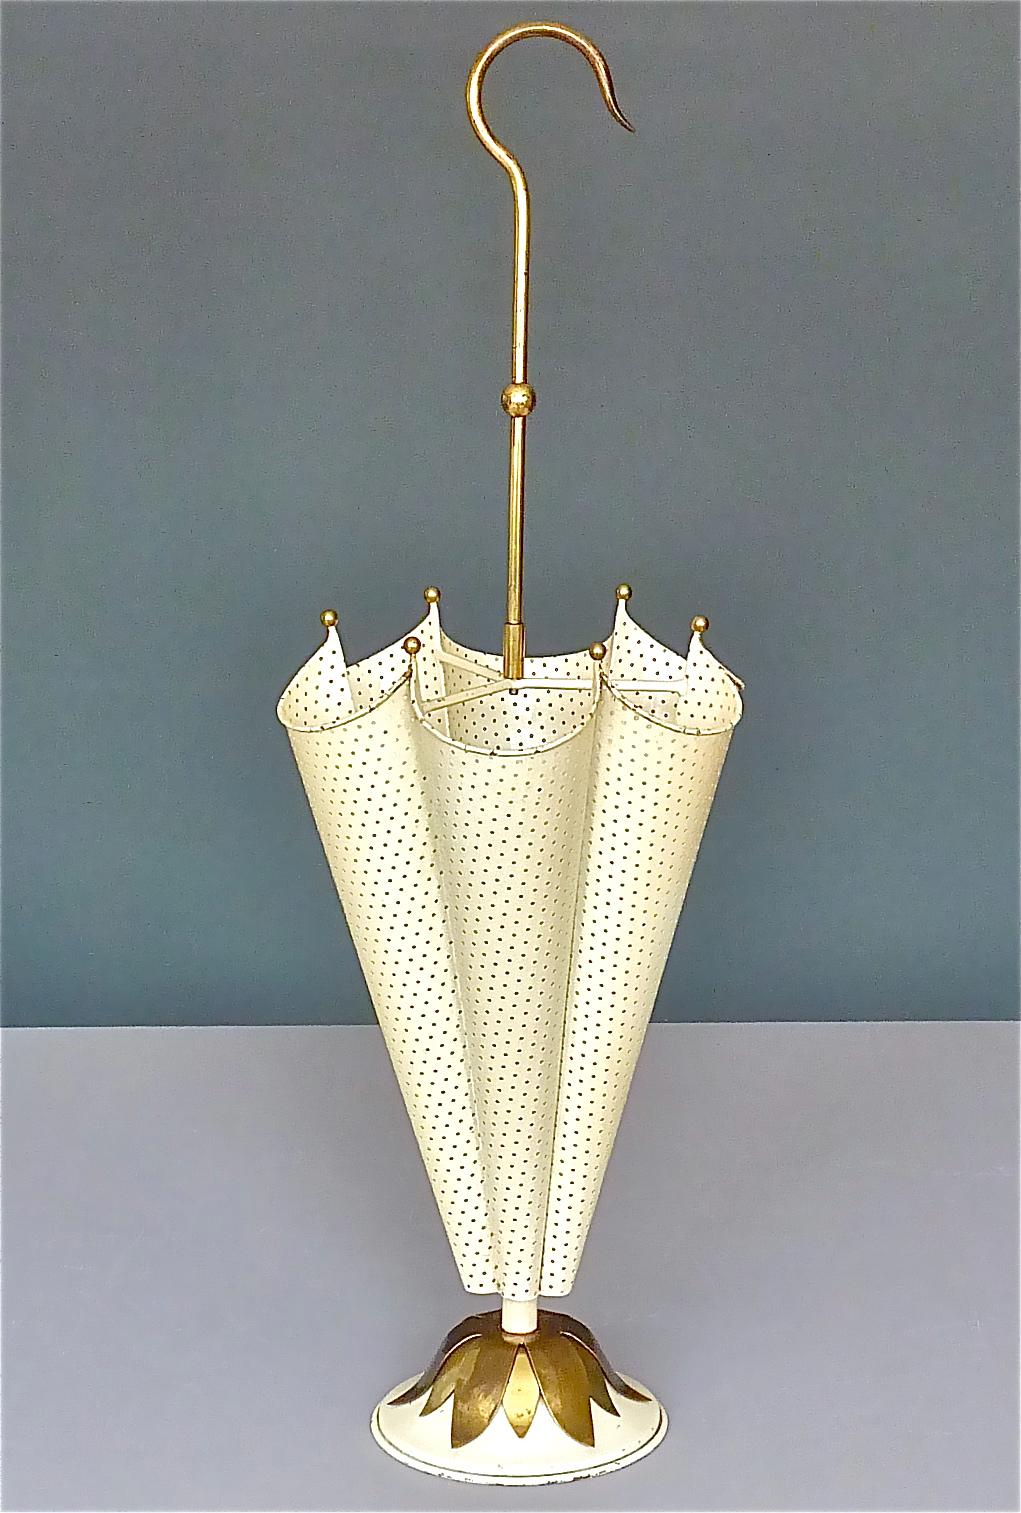 Amazing Midcentury umbrella stand, the design attributed to Mathieu Matégot, France, around 1955. It is made of ivory color to off-white enameled and perforated metal combined with beautiful patinated brass elements and details, designed to an